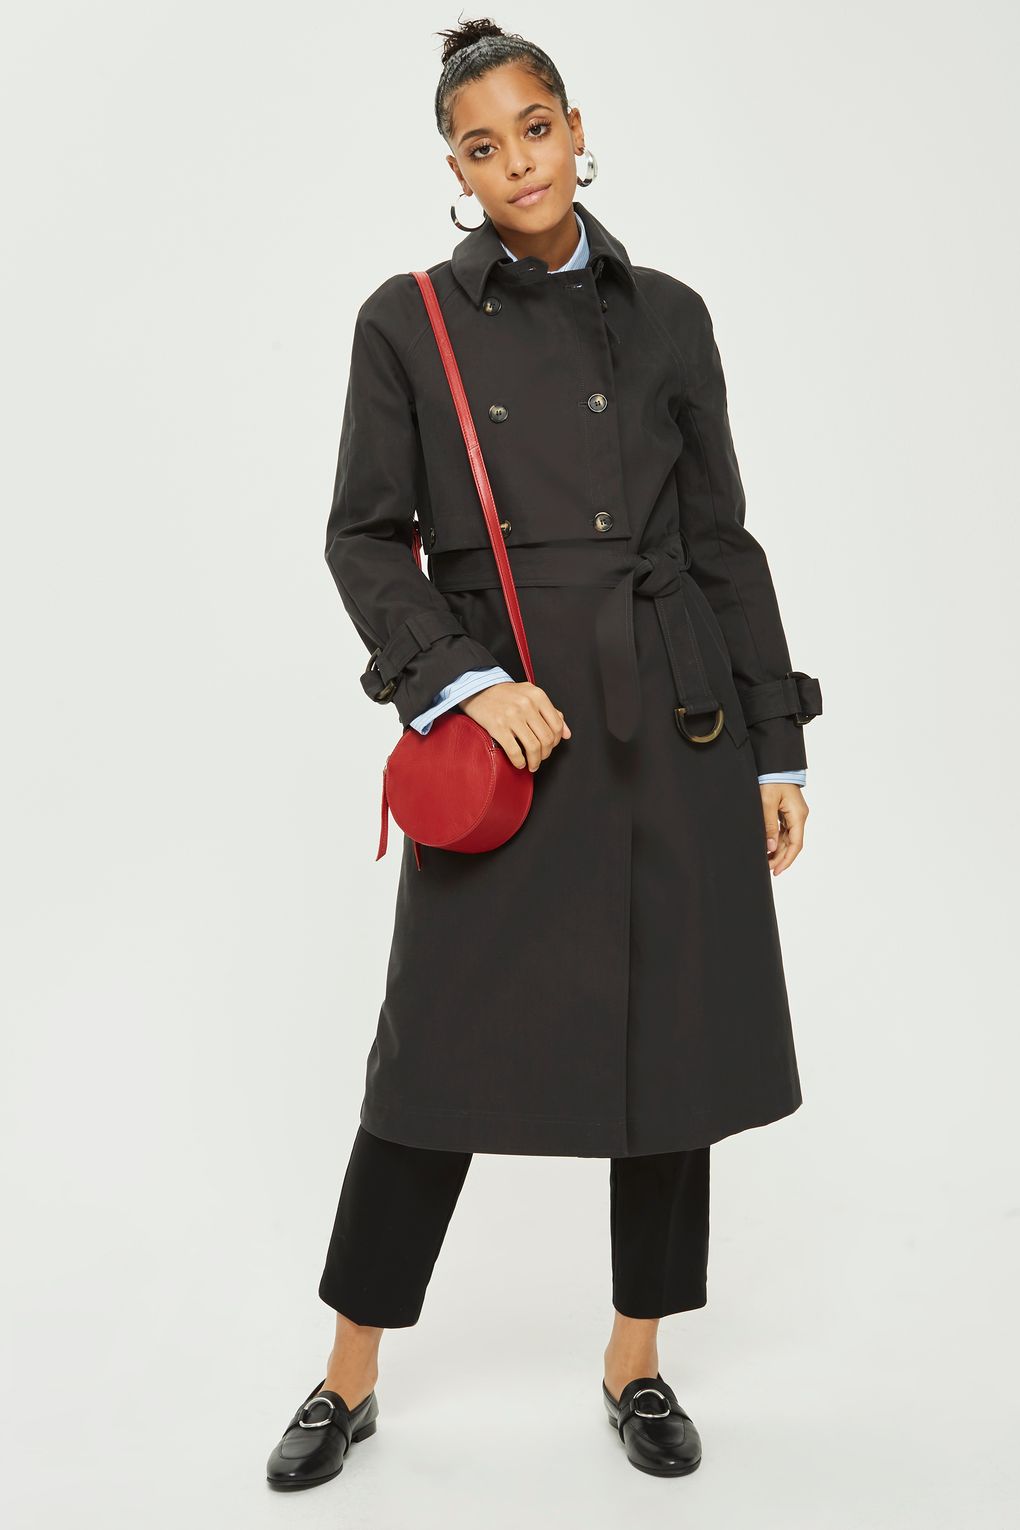 topshop trench black - Style Classics: The Trench Coat